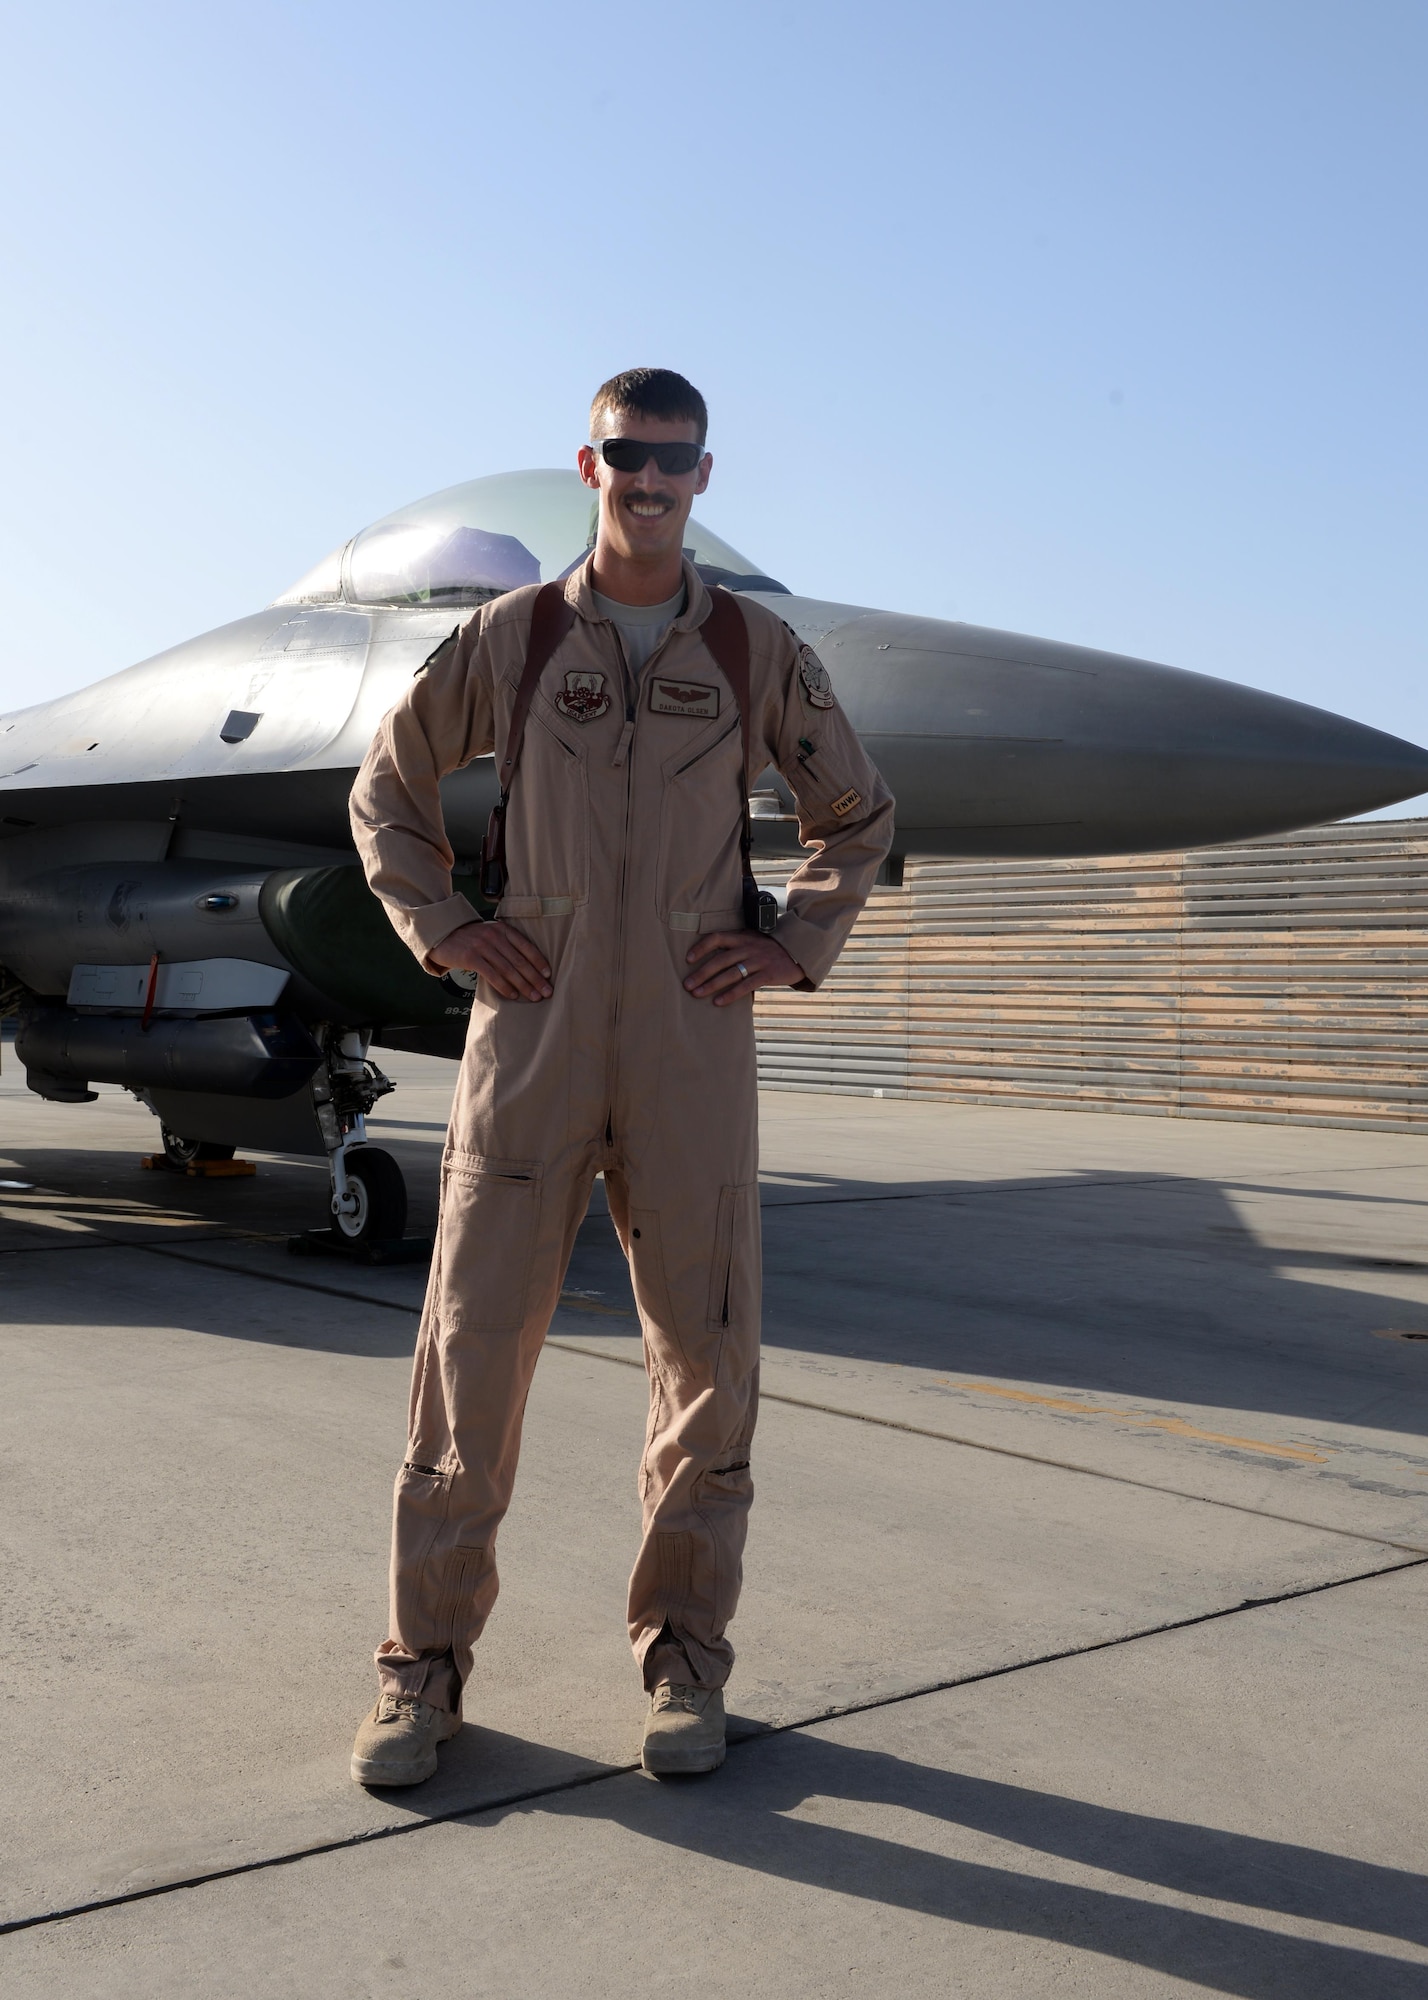 U.S. Air Force Capt. Dakota Olsen, 555th Expeditionary Fighter Squadron F-16 Fighting Falcon pilot, poses in front of a jet June 17, 2015, at Bagram Airfield, Afghanistan. Olsen’s job is to provide close air support and armed over watch for military personnel in Afghanistan. He flies various sorties and missions throughout the country on a daily basis providing airpower to ensure a safe and secure environment for personnel at BAF. (U.S. Air Force photo by Senior Airman Cierra Presentado/Released)